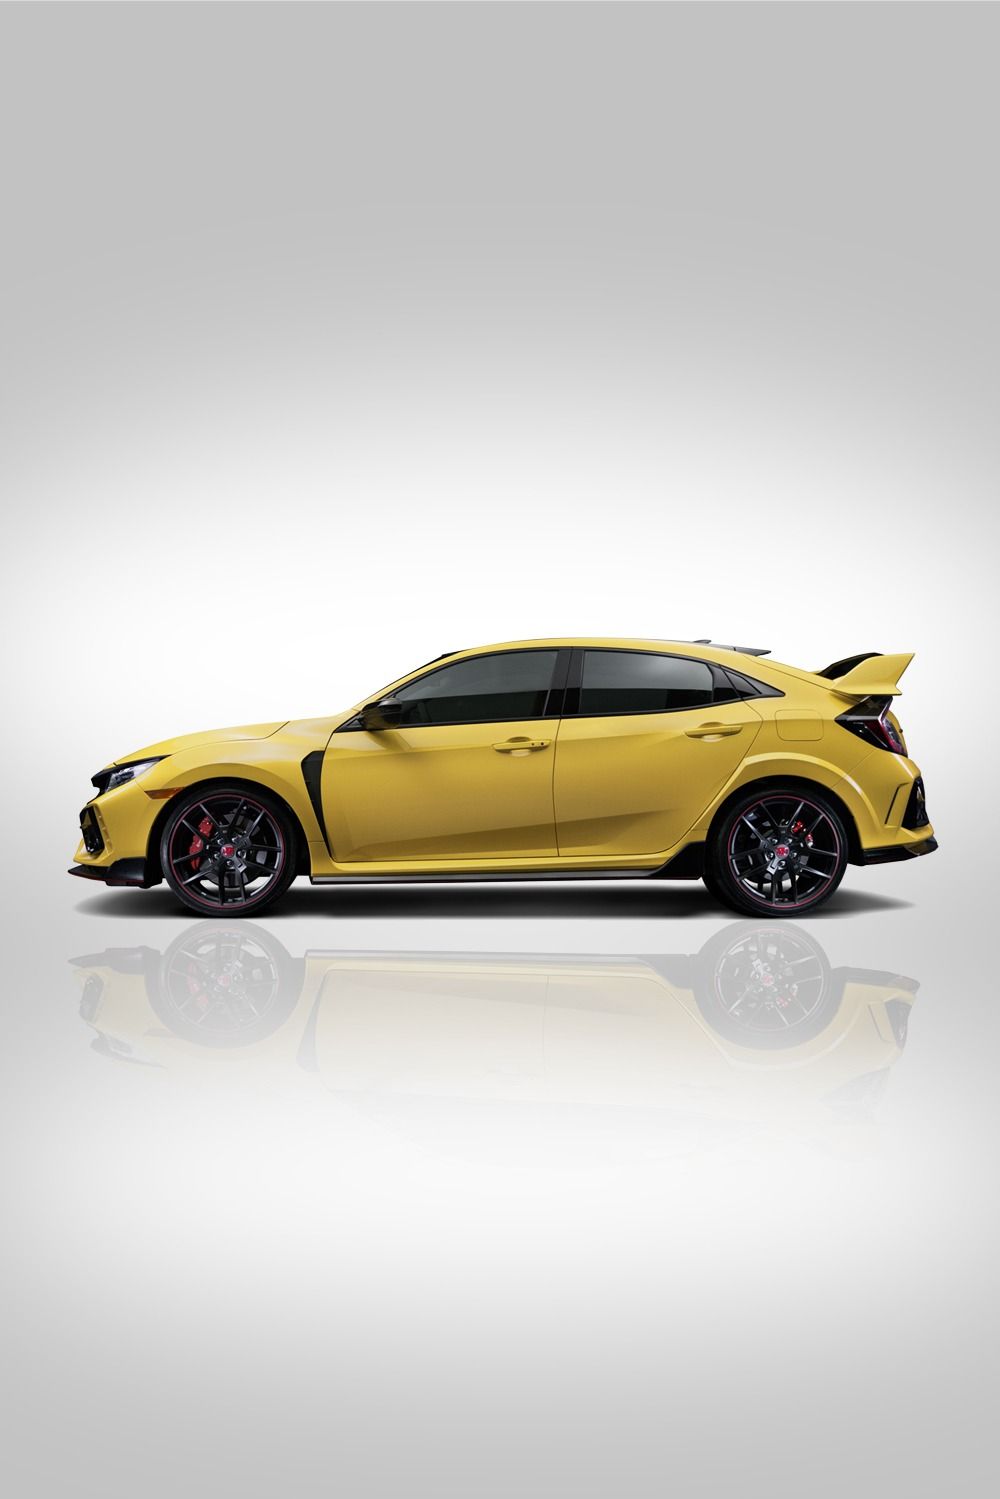 Limited Edition Civic Type R. Honda civic type r, Hot hatch, Civic